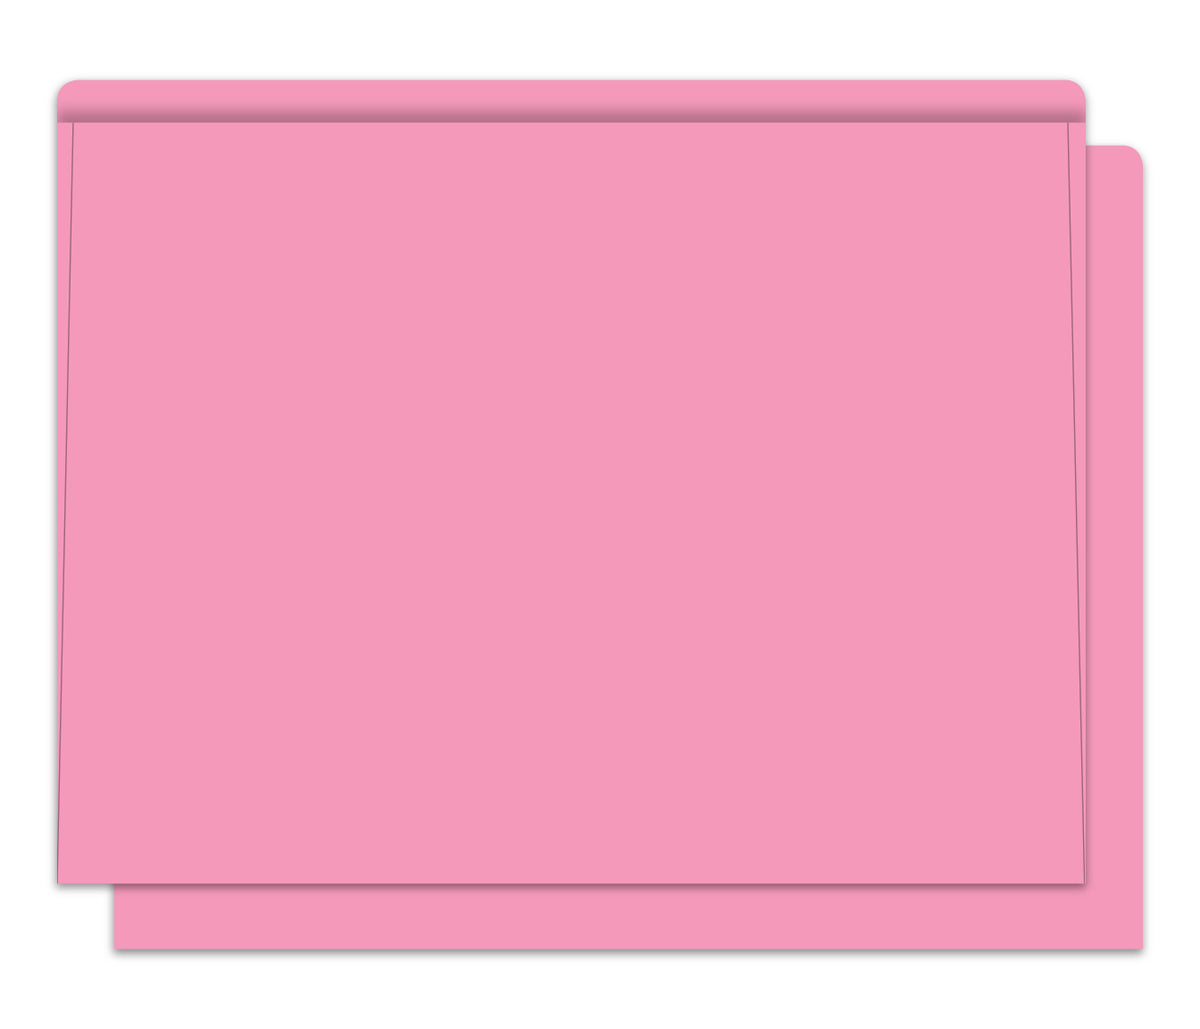 Heavy Duty Deal Envelopes (Jackets) Plain in Pink [Packs of 500]